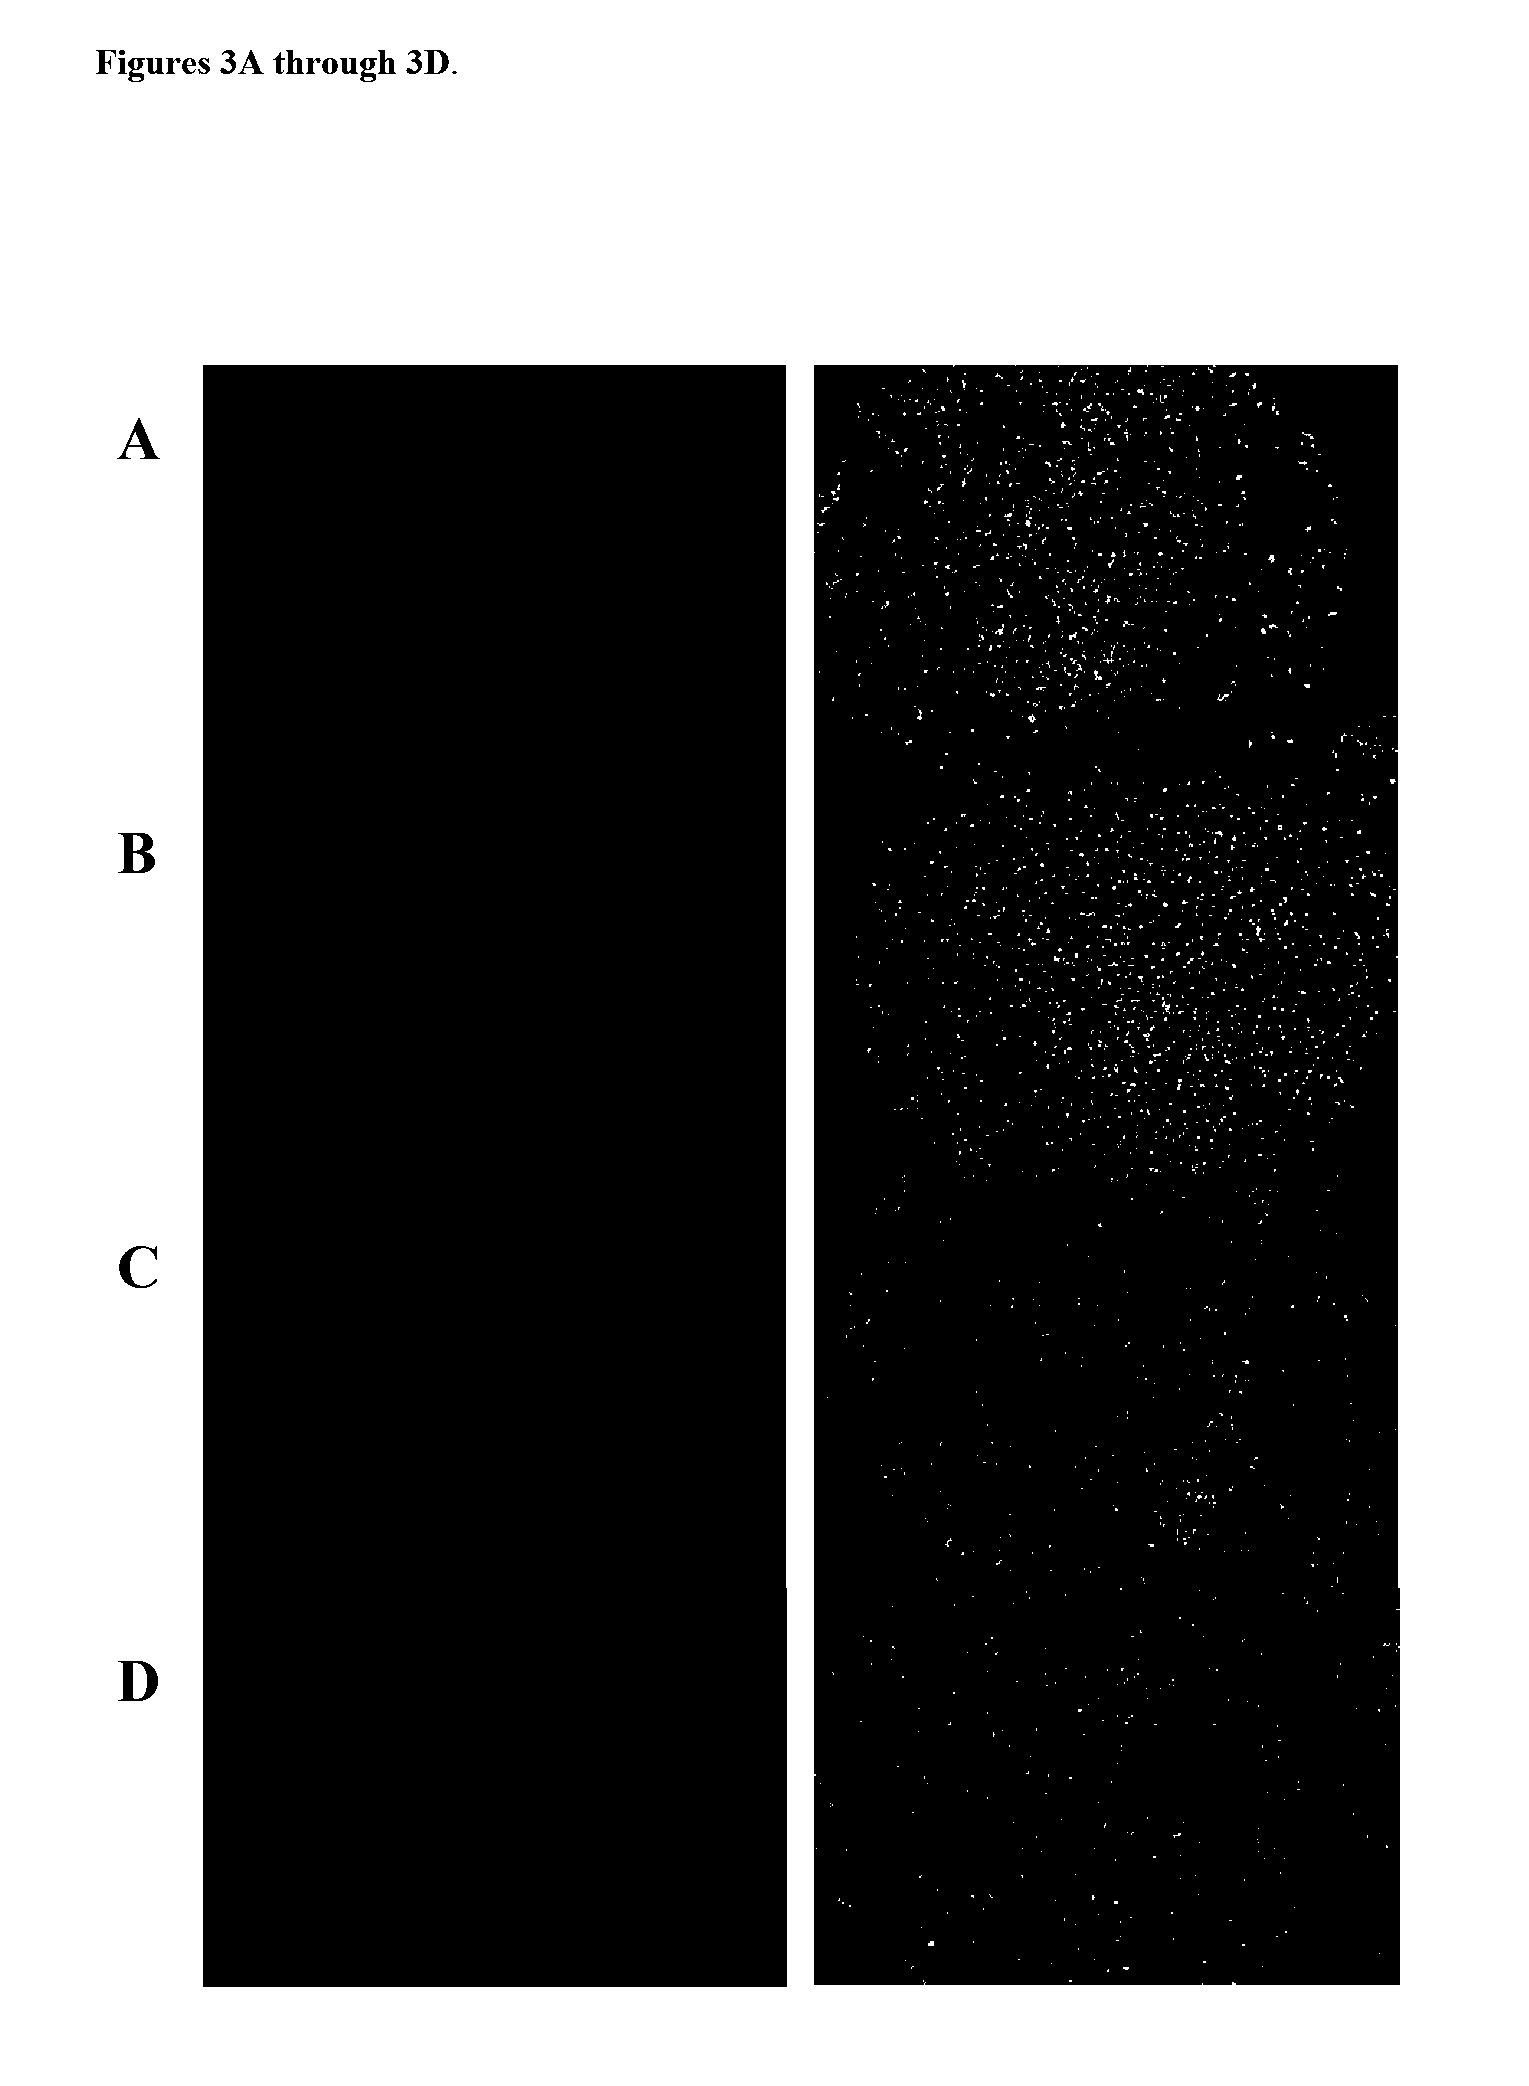 Reagents and Methods for Using Human Embryonic Stem Cells to Evaluate Toxicity of Pharmaceutical Compounds and Other Chemicals